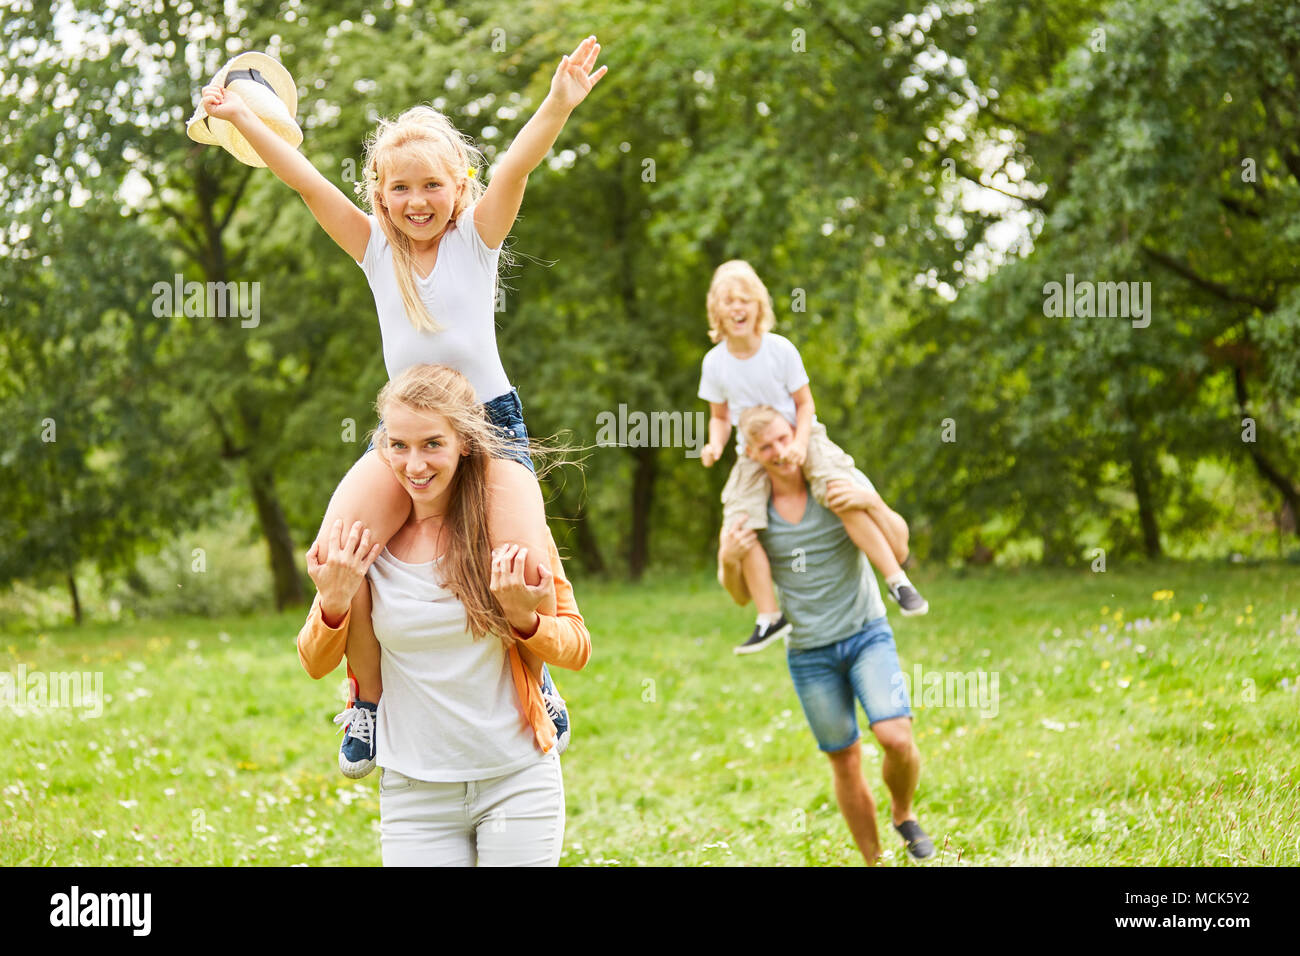 Happy girl is riding piggyback on mother's back Stock Photo